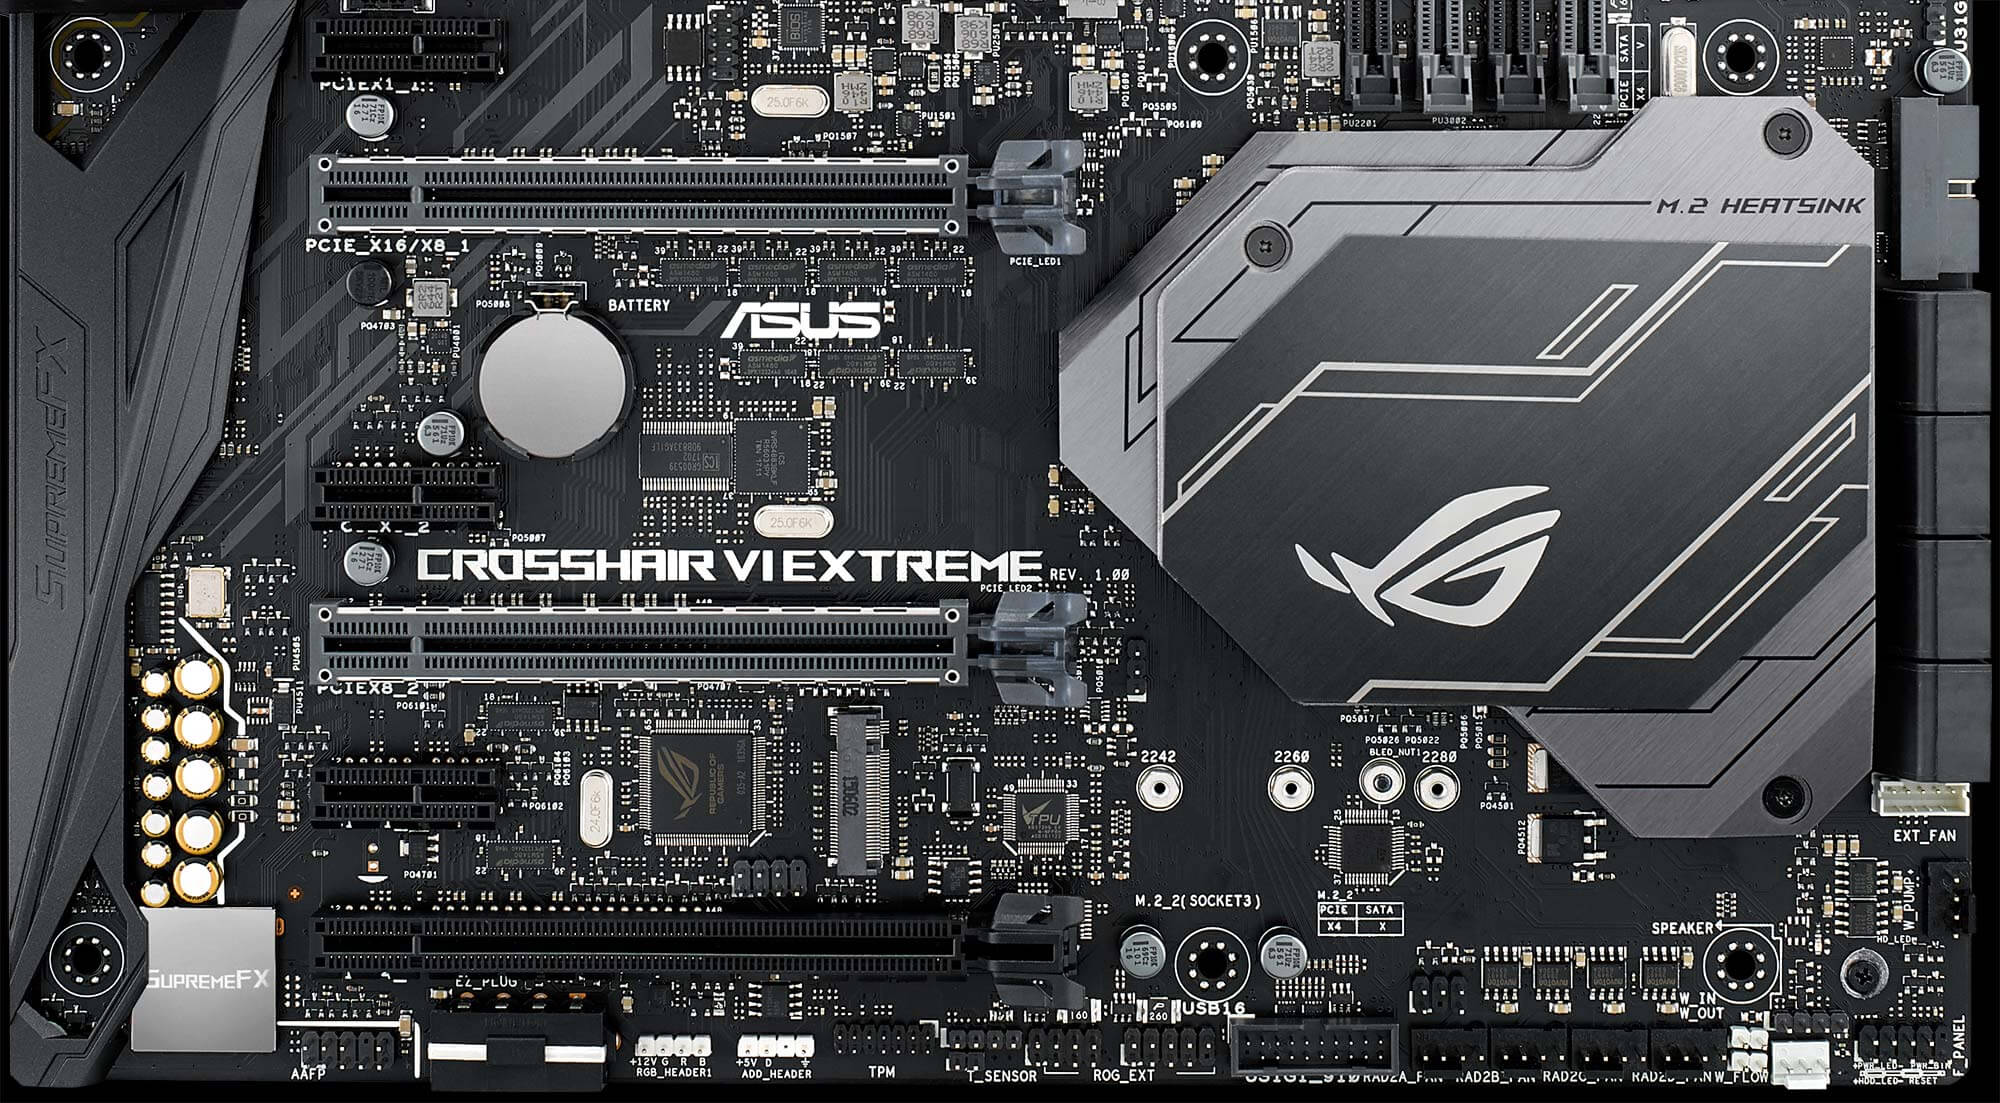 Asus debuts ROG Crosshair VI Extreme motherboard for Ryzen enthusiasts